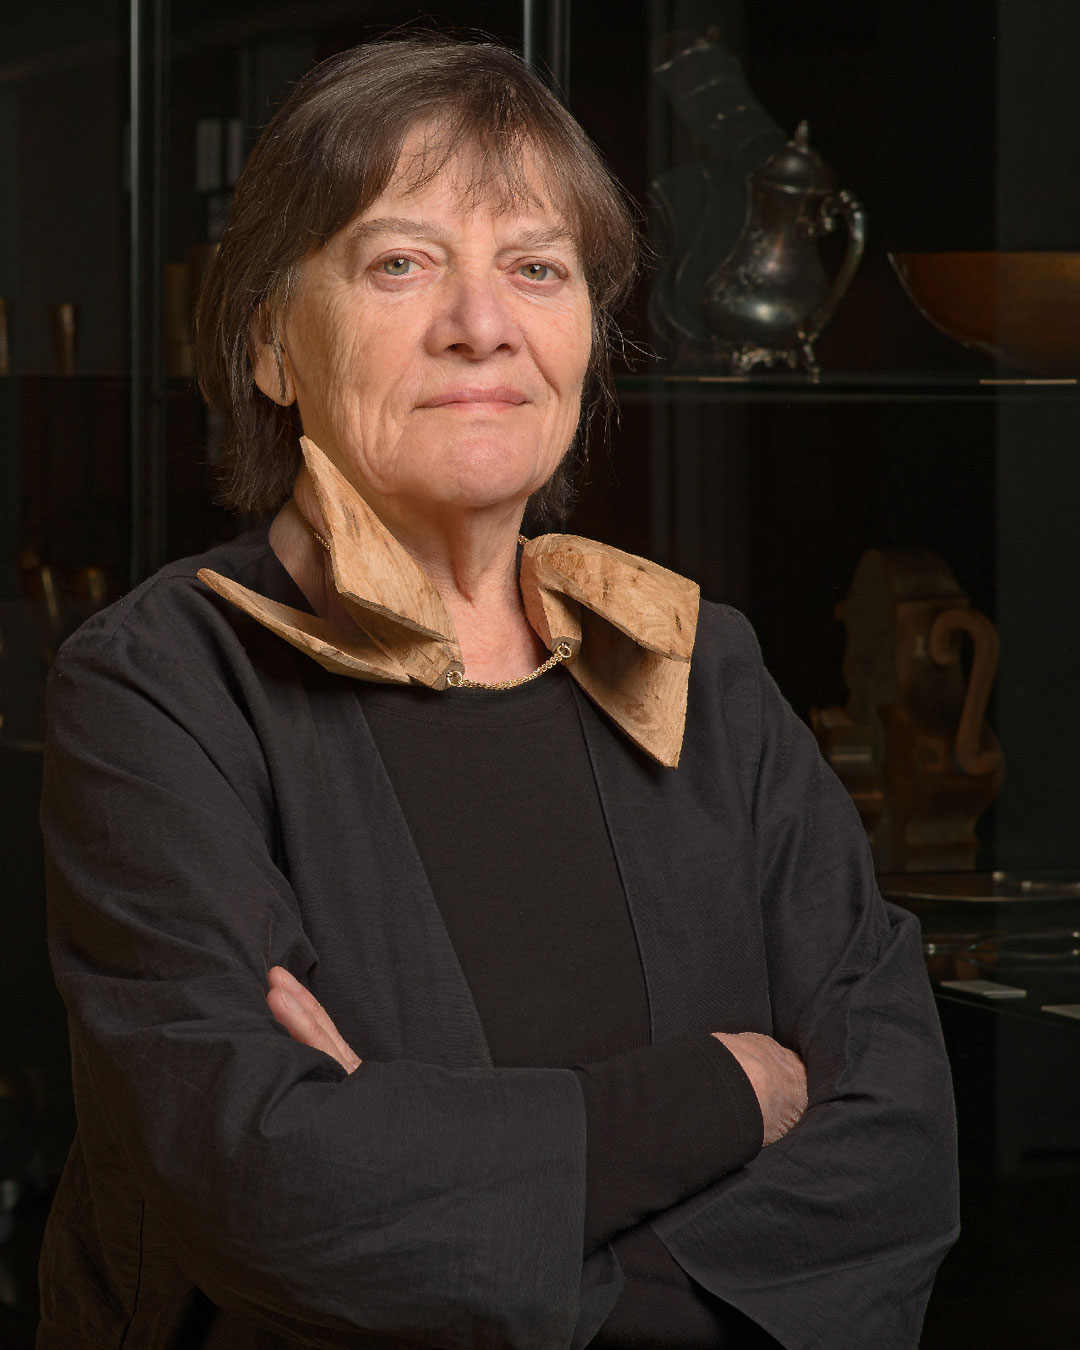 Marie-José van den Hout wearing Dorothea Prühl's necklace Two Large Birds, 2020, elm wood and gold, price on request